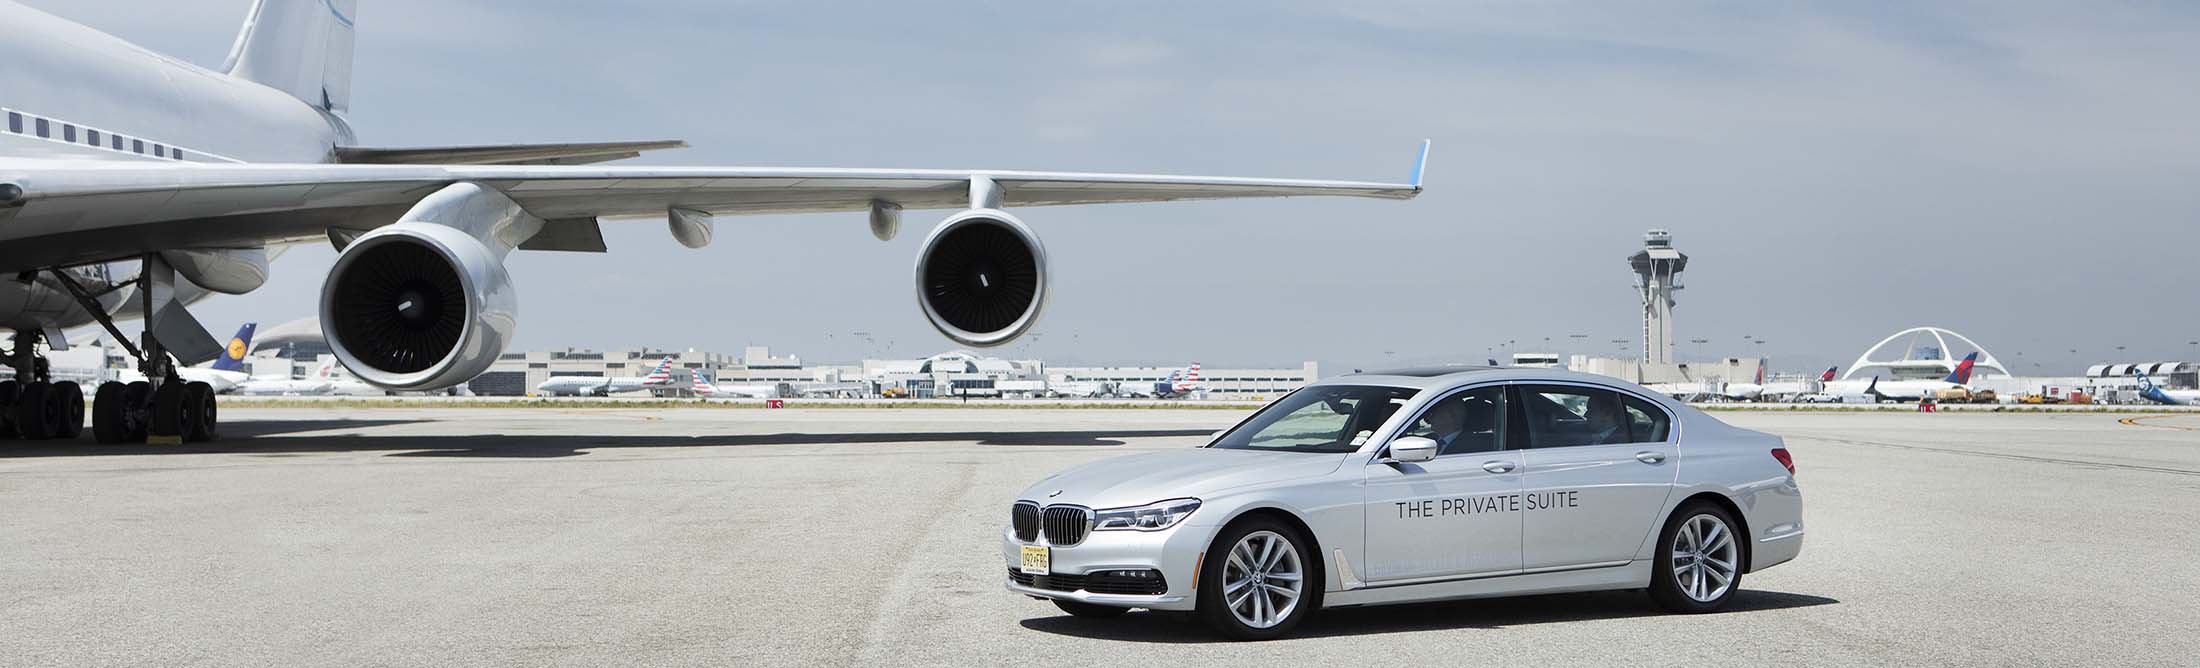 Airport VIP Assistance Service With Flight Connection – Istanbul Airport  Transportation   Istanbul Airport Transfer   Airport VIP Assistance Service  and Cruise Port Transfer